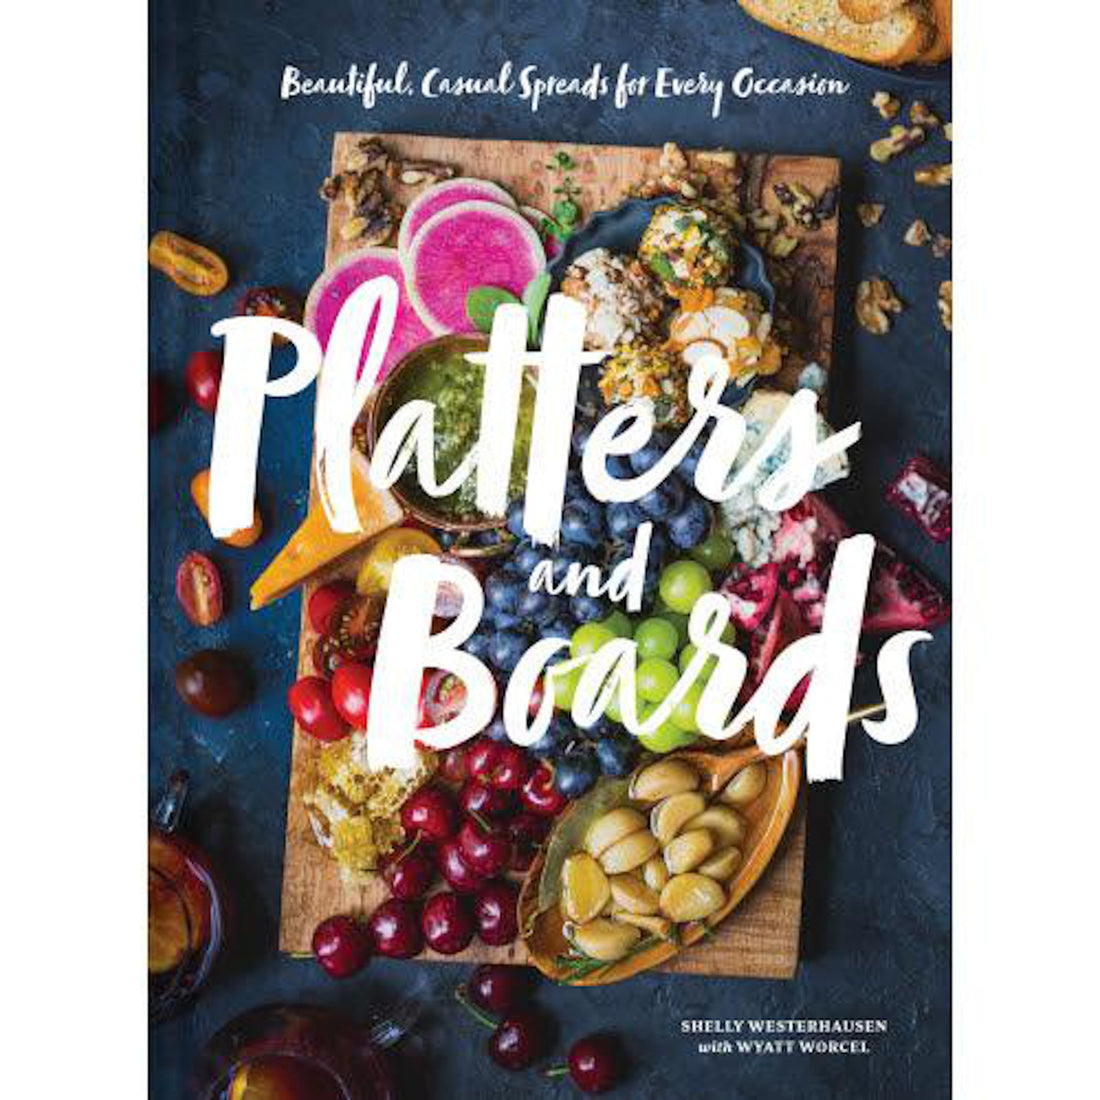 Cover of a cookbook titled &quot;Platters and Boards&quot; by Chronicle Books featuring an assortment of foods artistically arranged on a wooden board, perfect for entertaining.